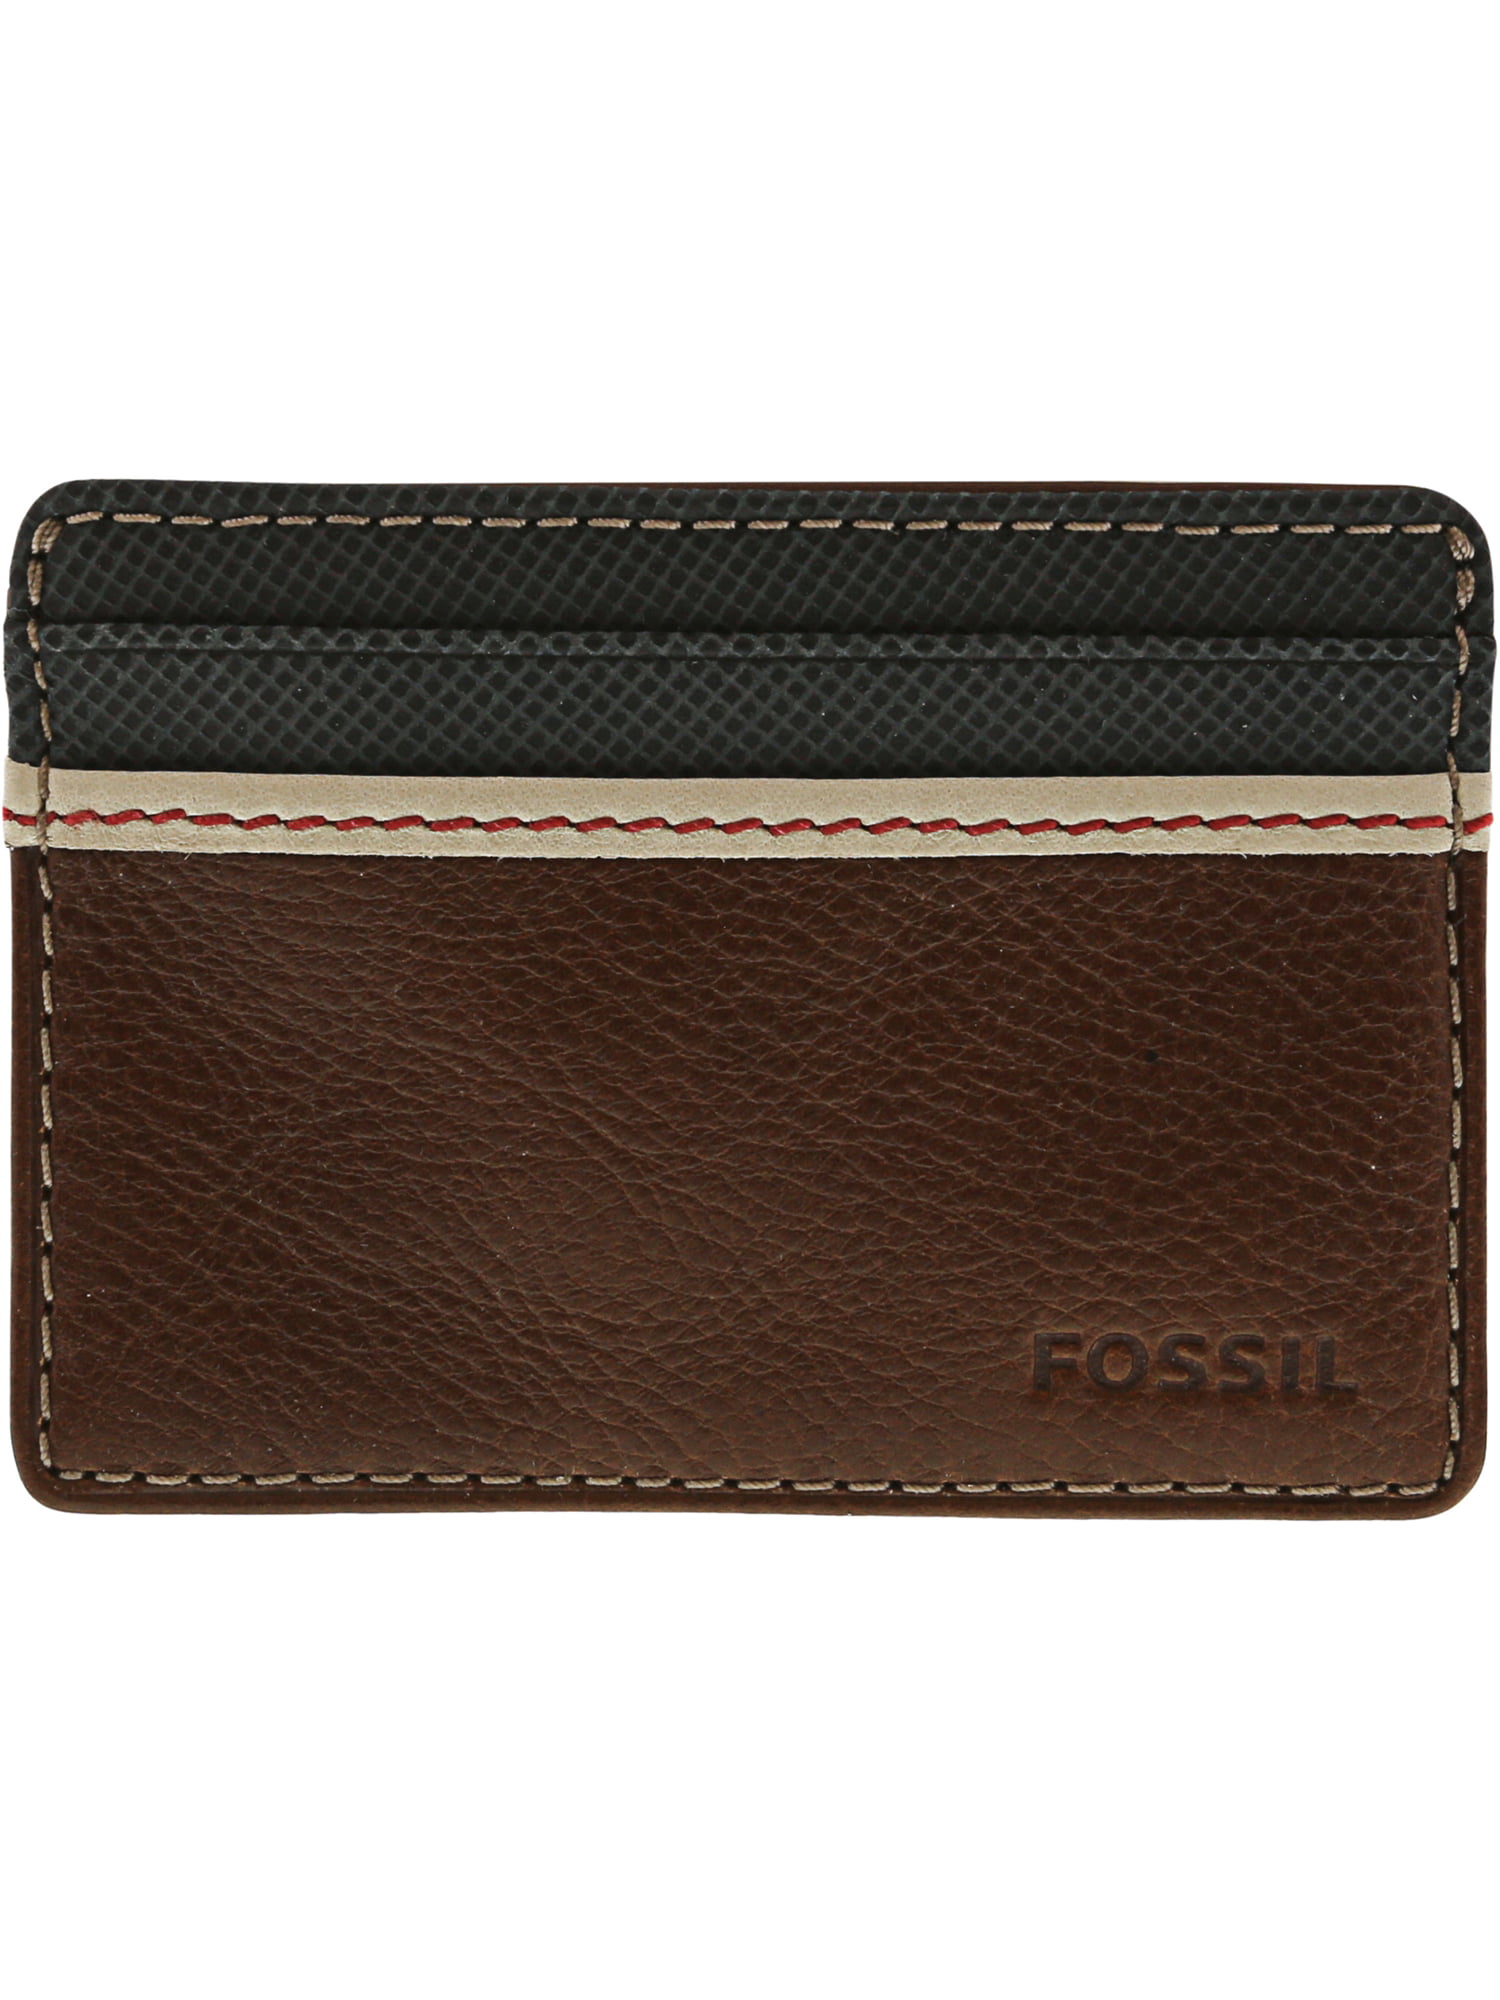 mens leather card case wallet